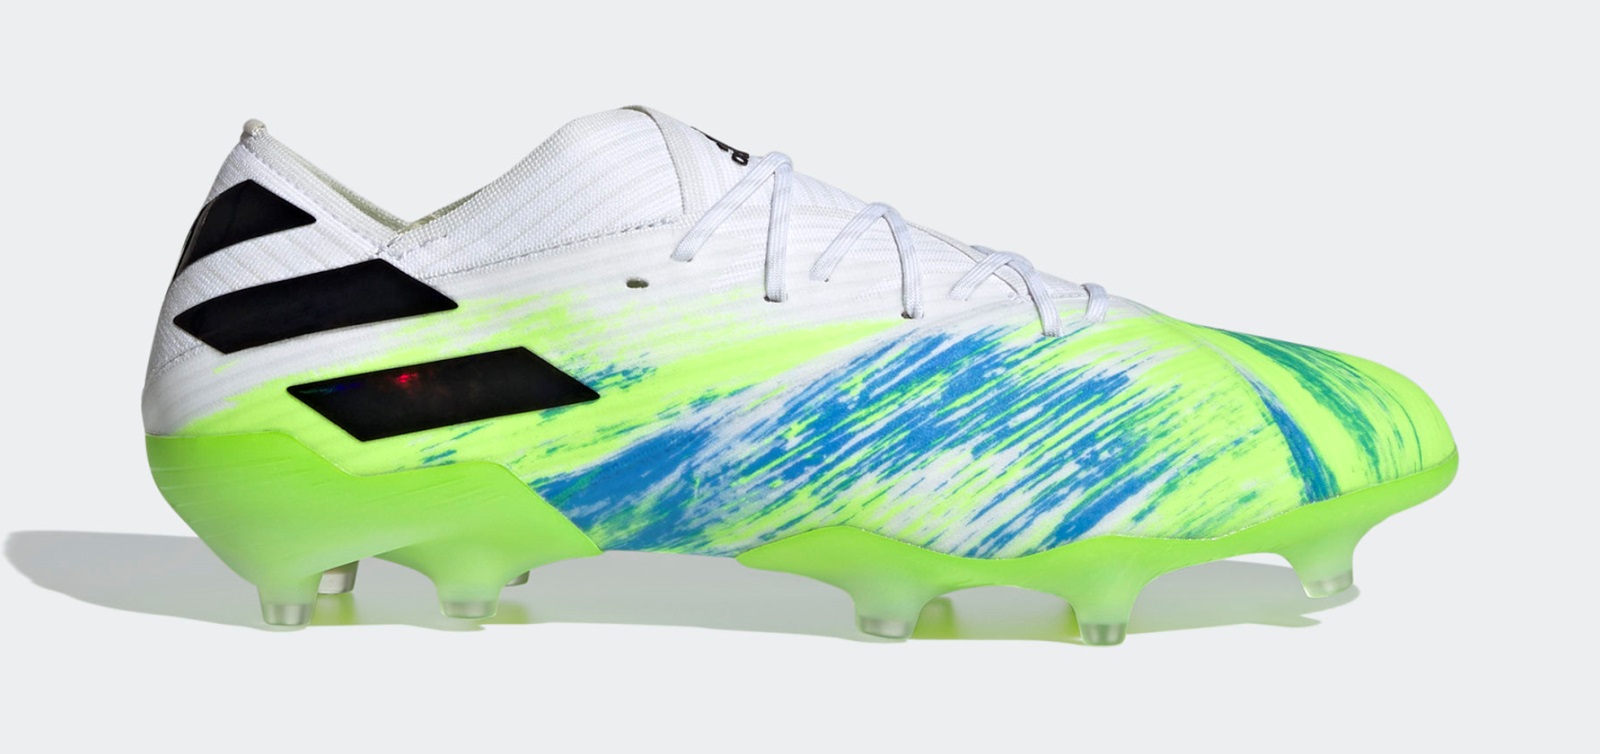 messi new football shoes